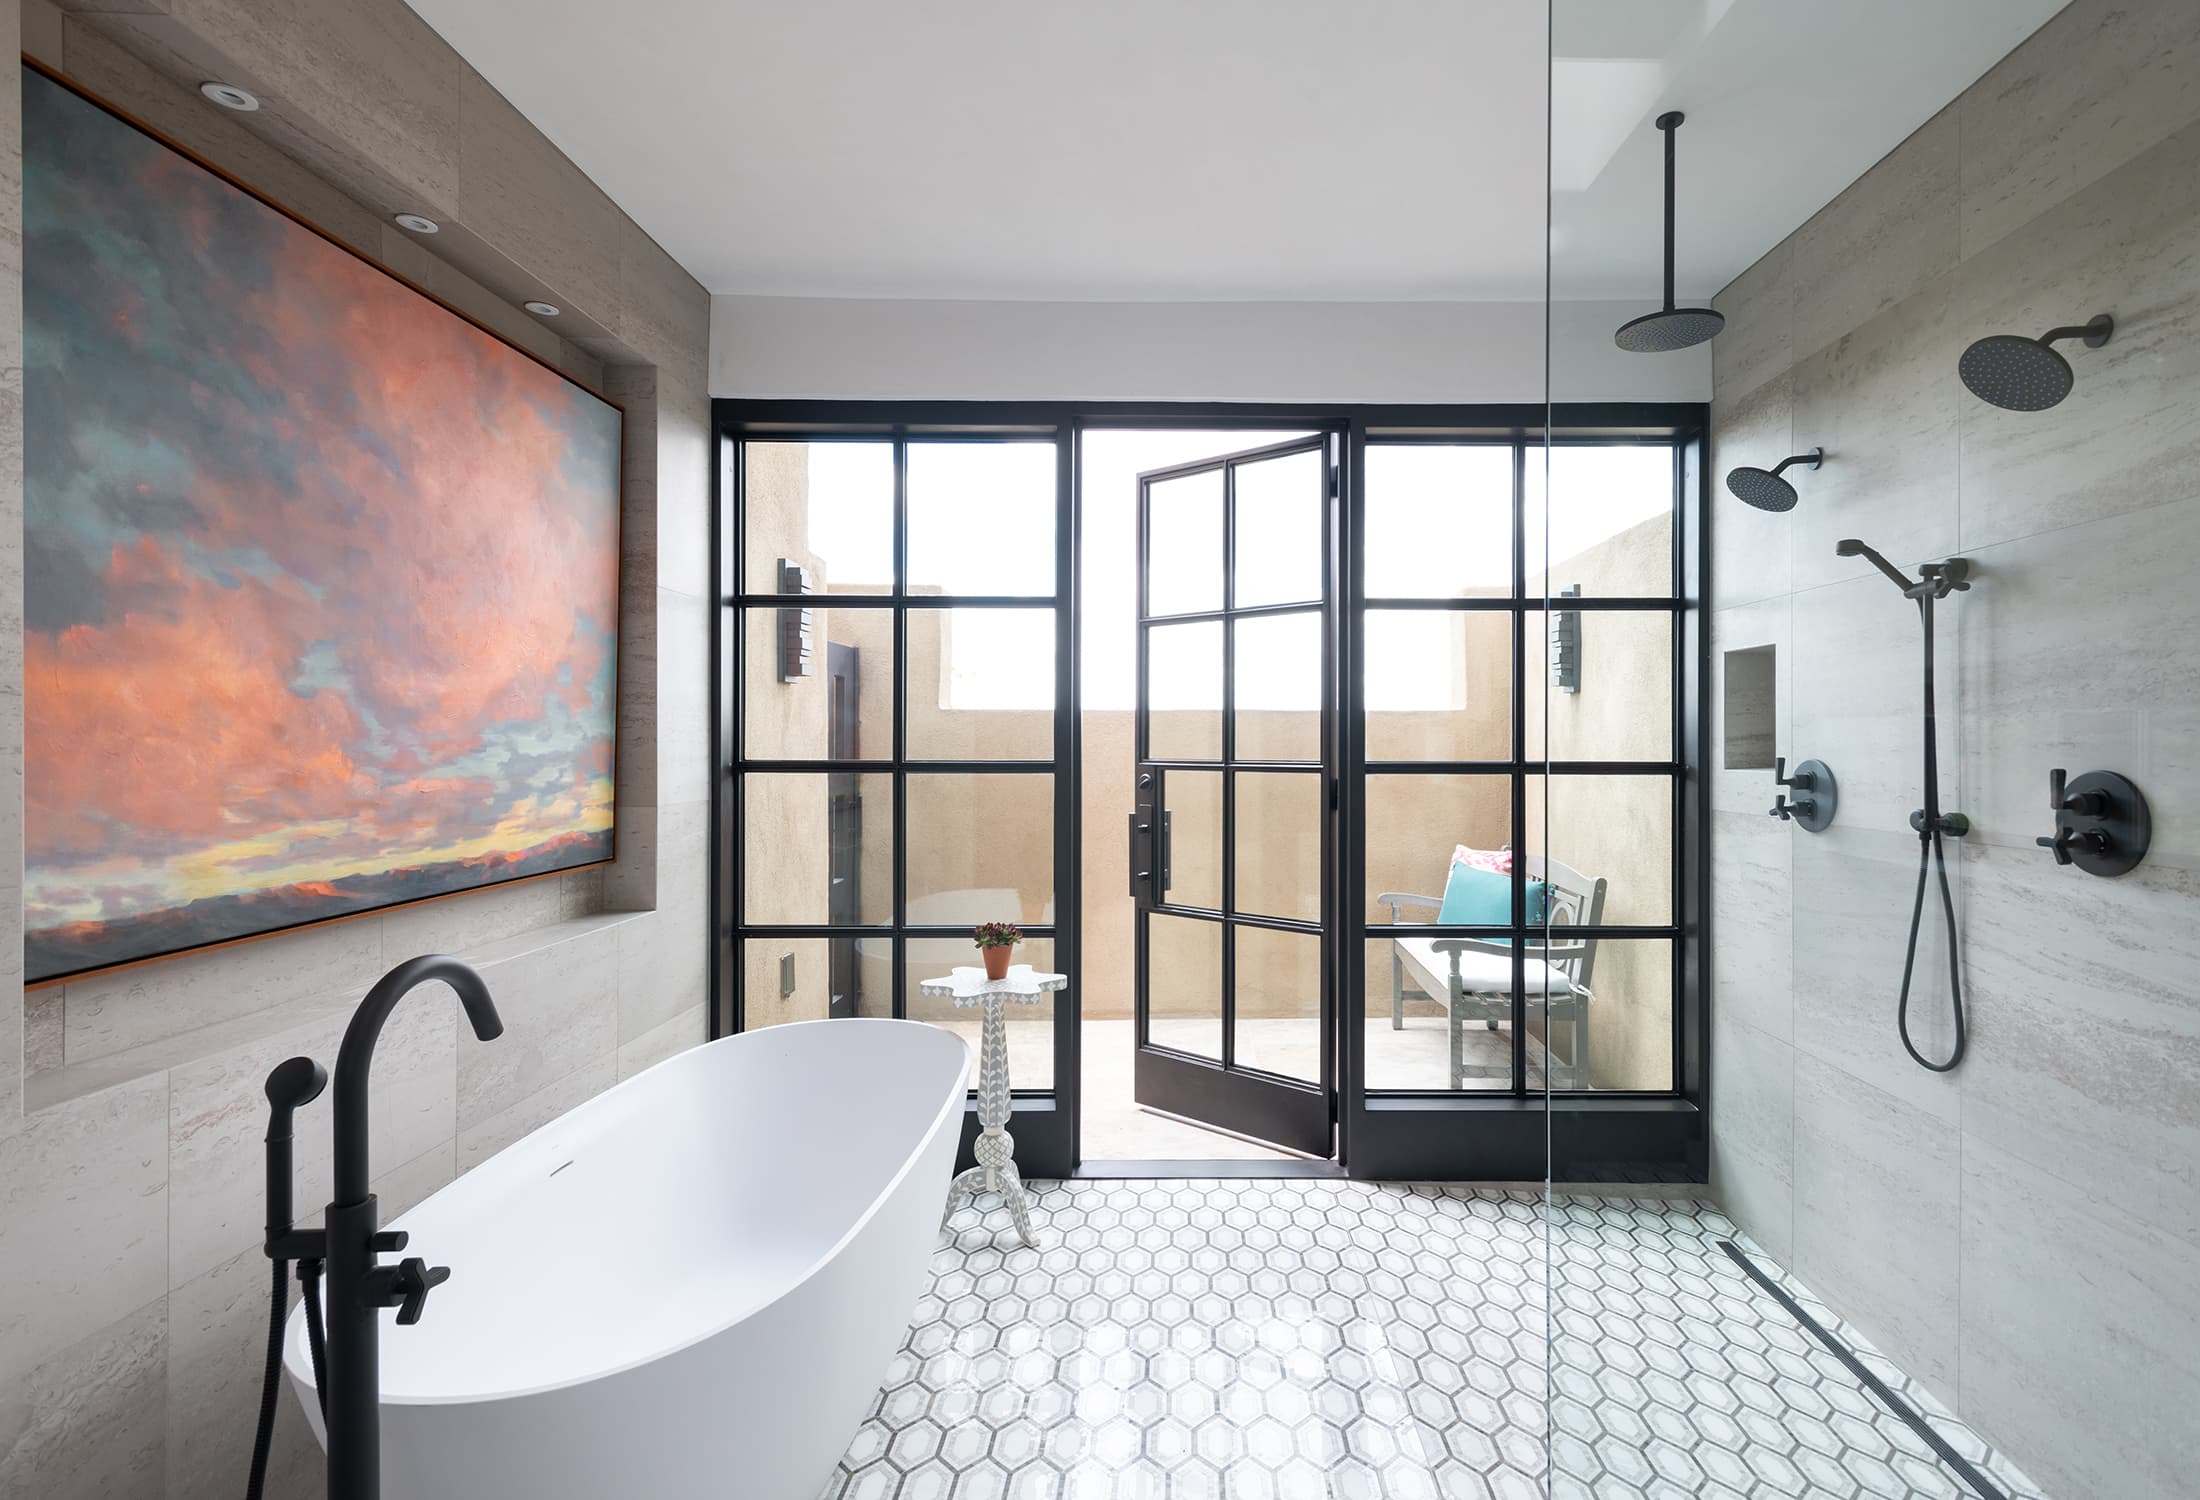 A vibrant sky painting and tons of natural light bring the beauty of the outdoors into this primary bath oasis